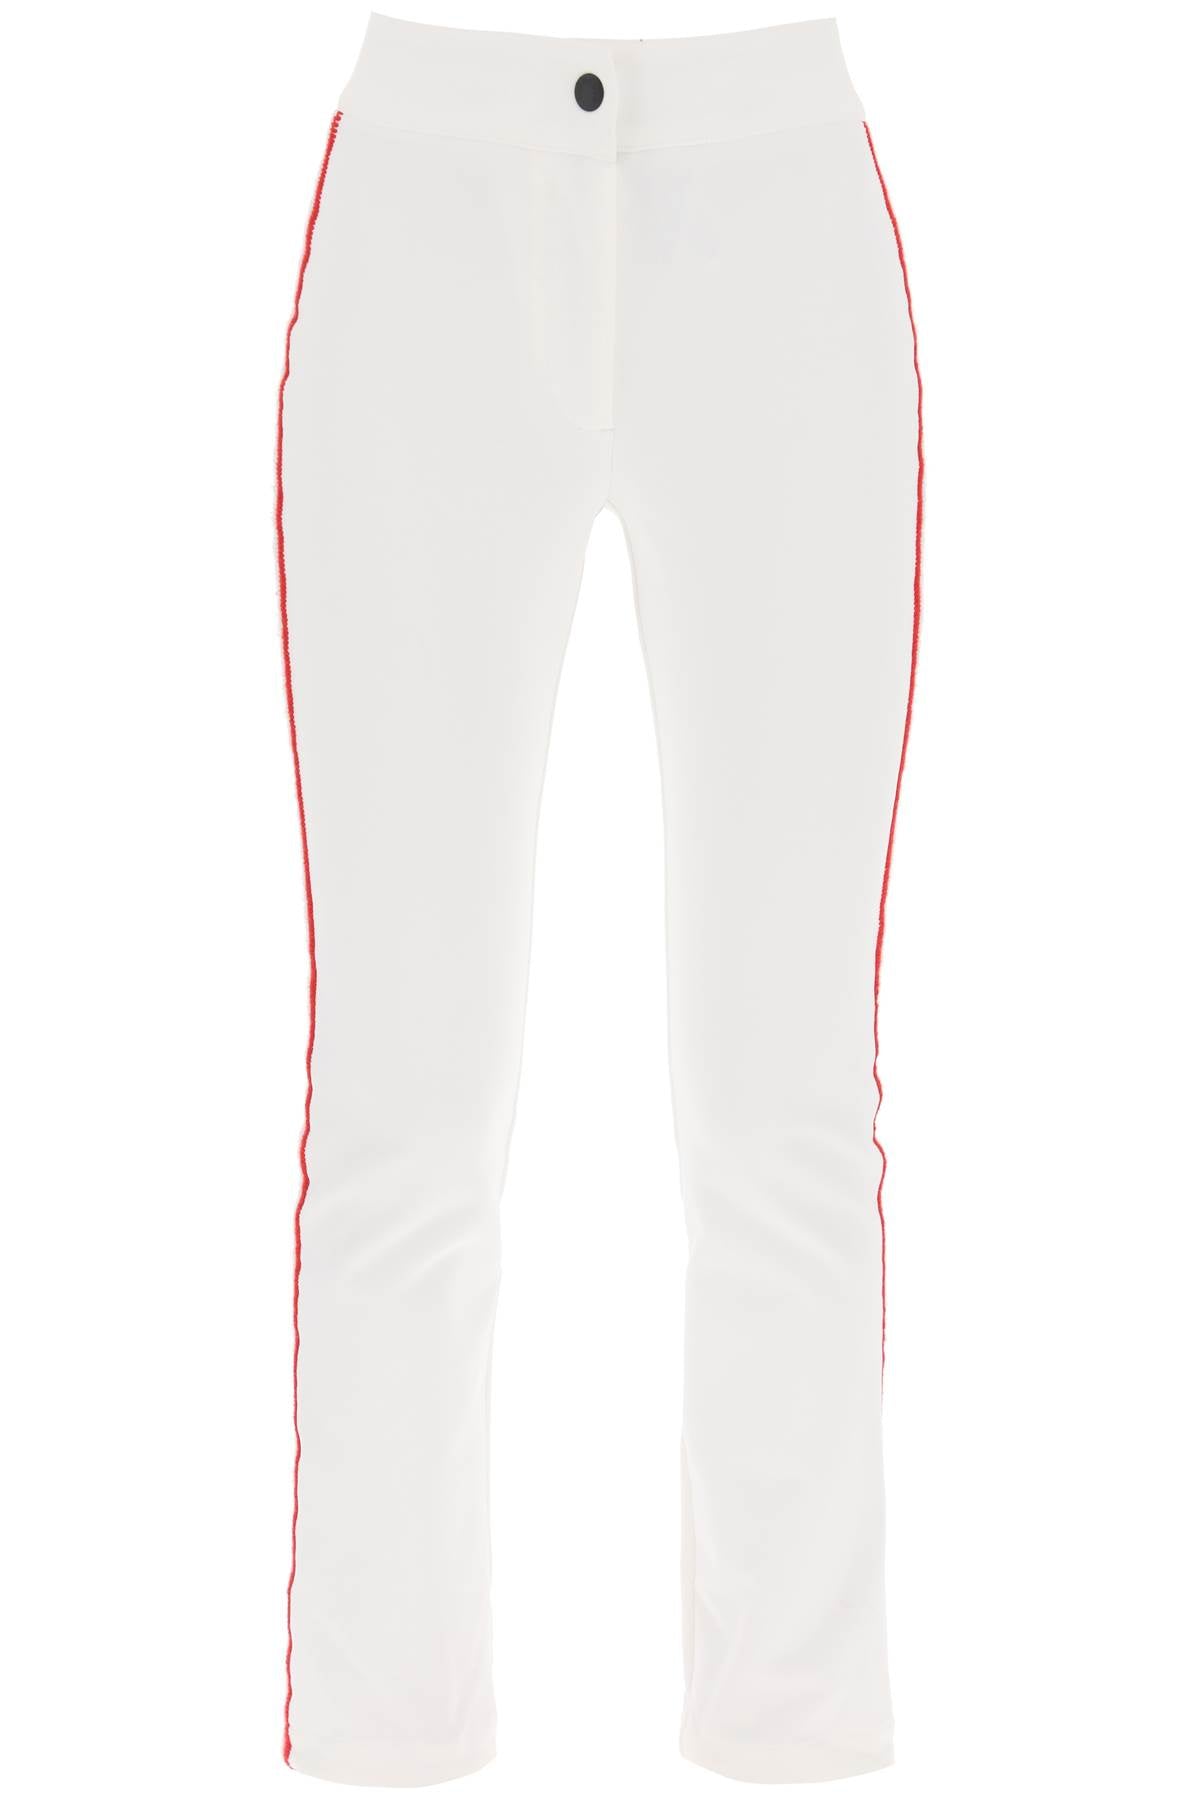 Moncler grenoble sporty pants with tricolor bands 2A000 07 53064 WHITE